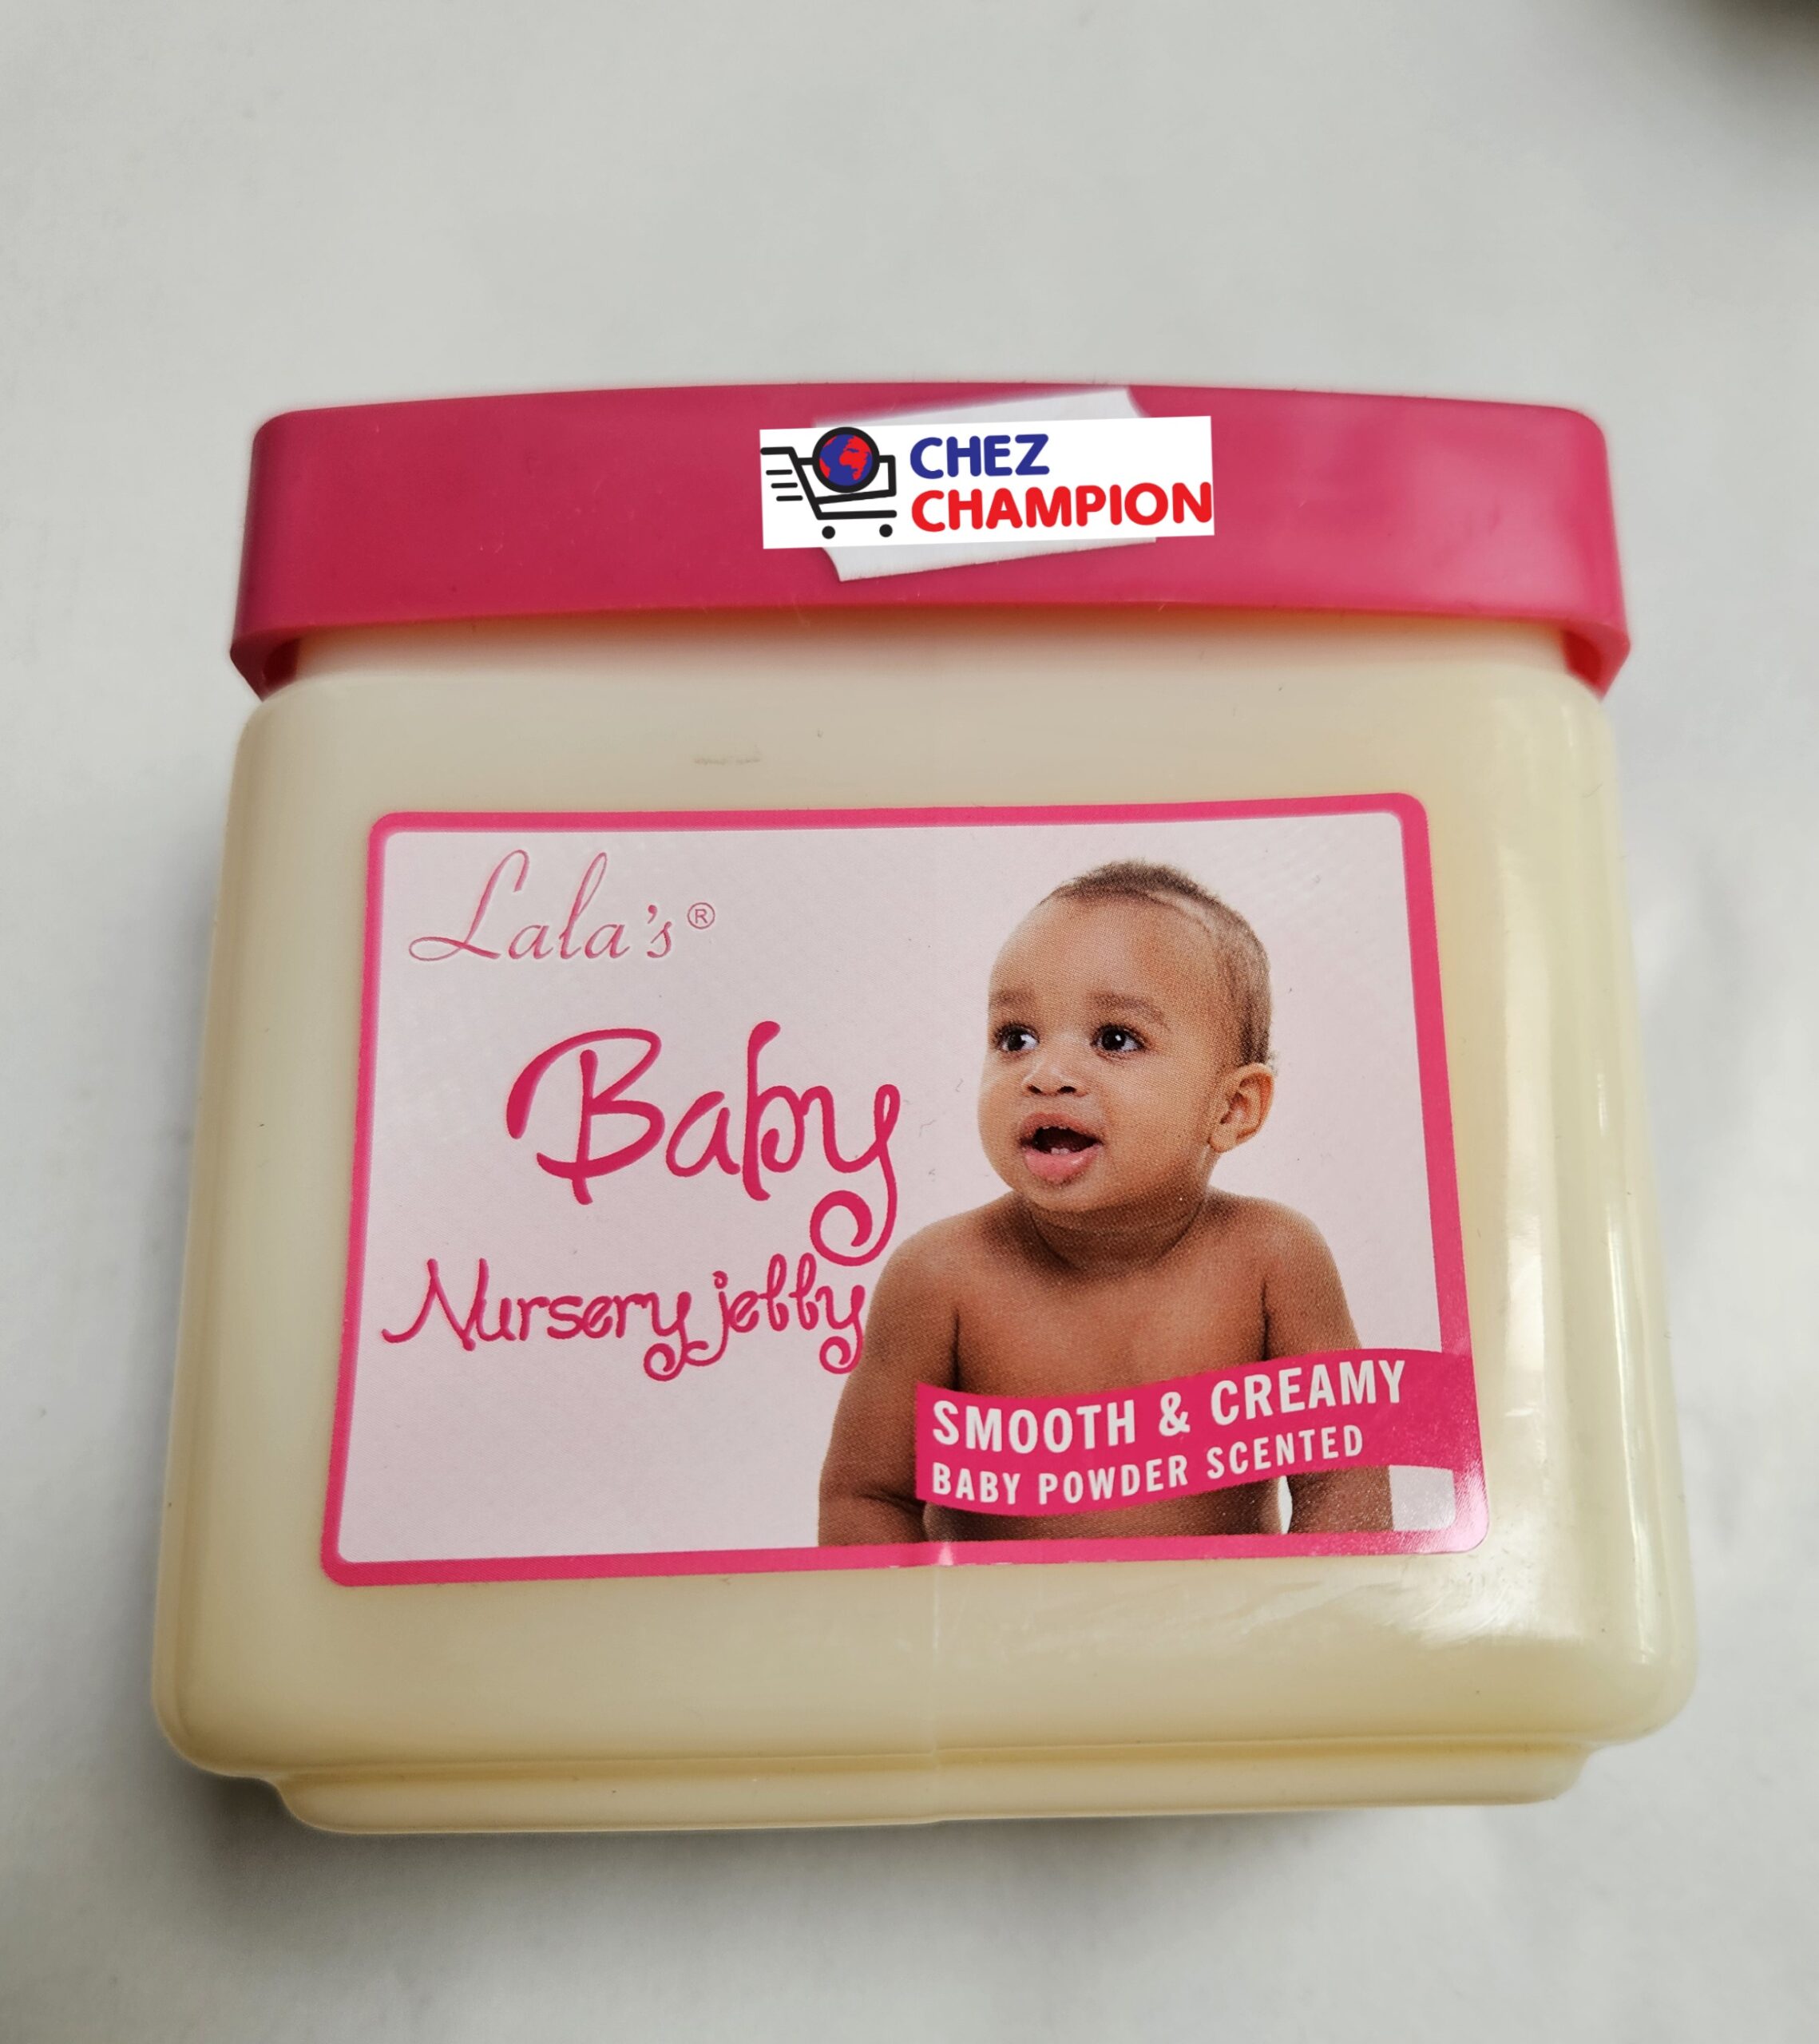 Lala’s baby nursery jelly smooth and creamy – 368g